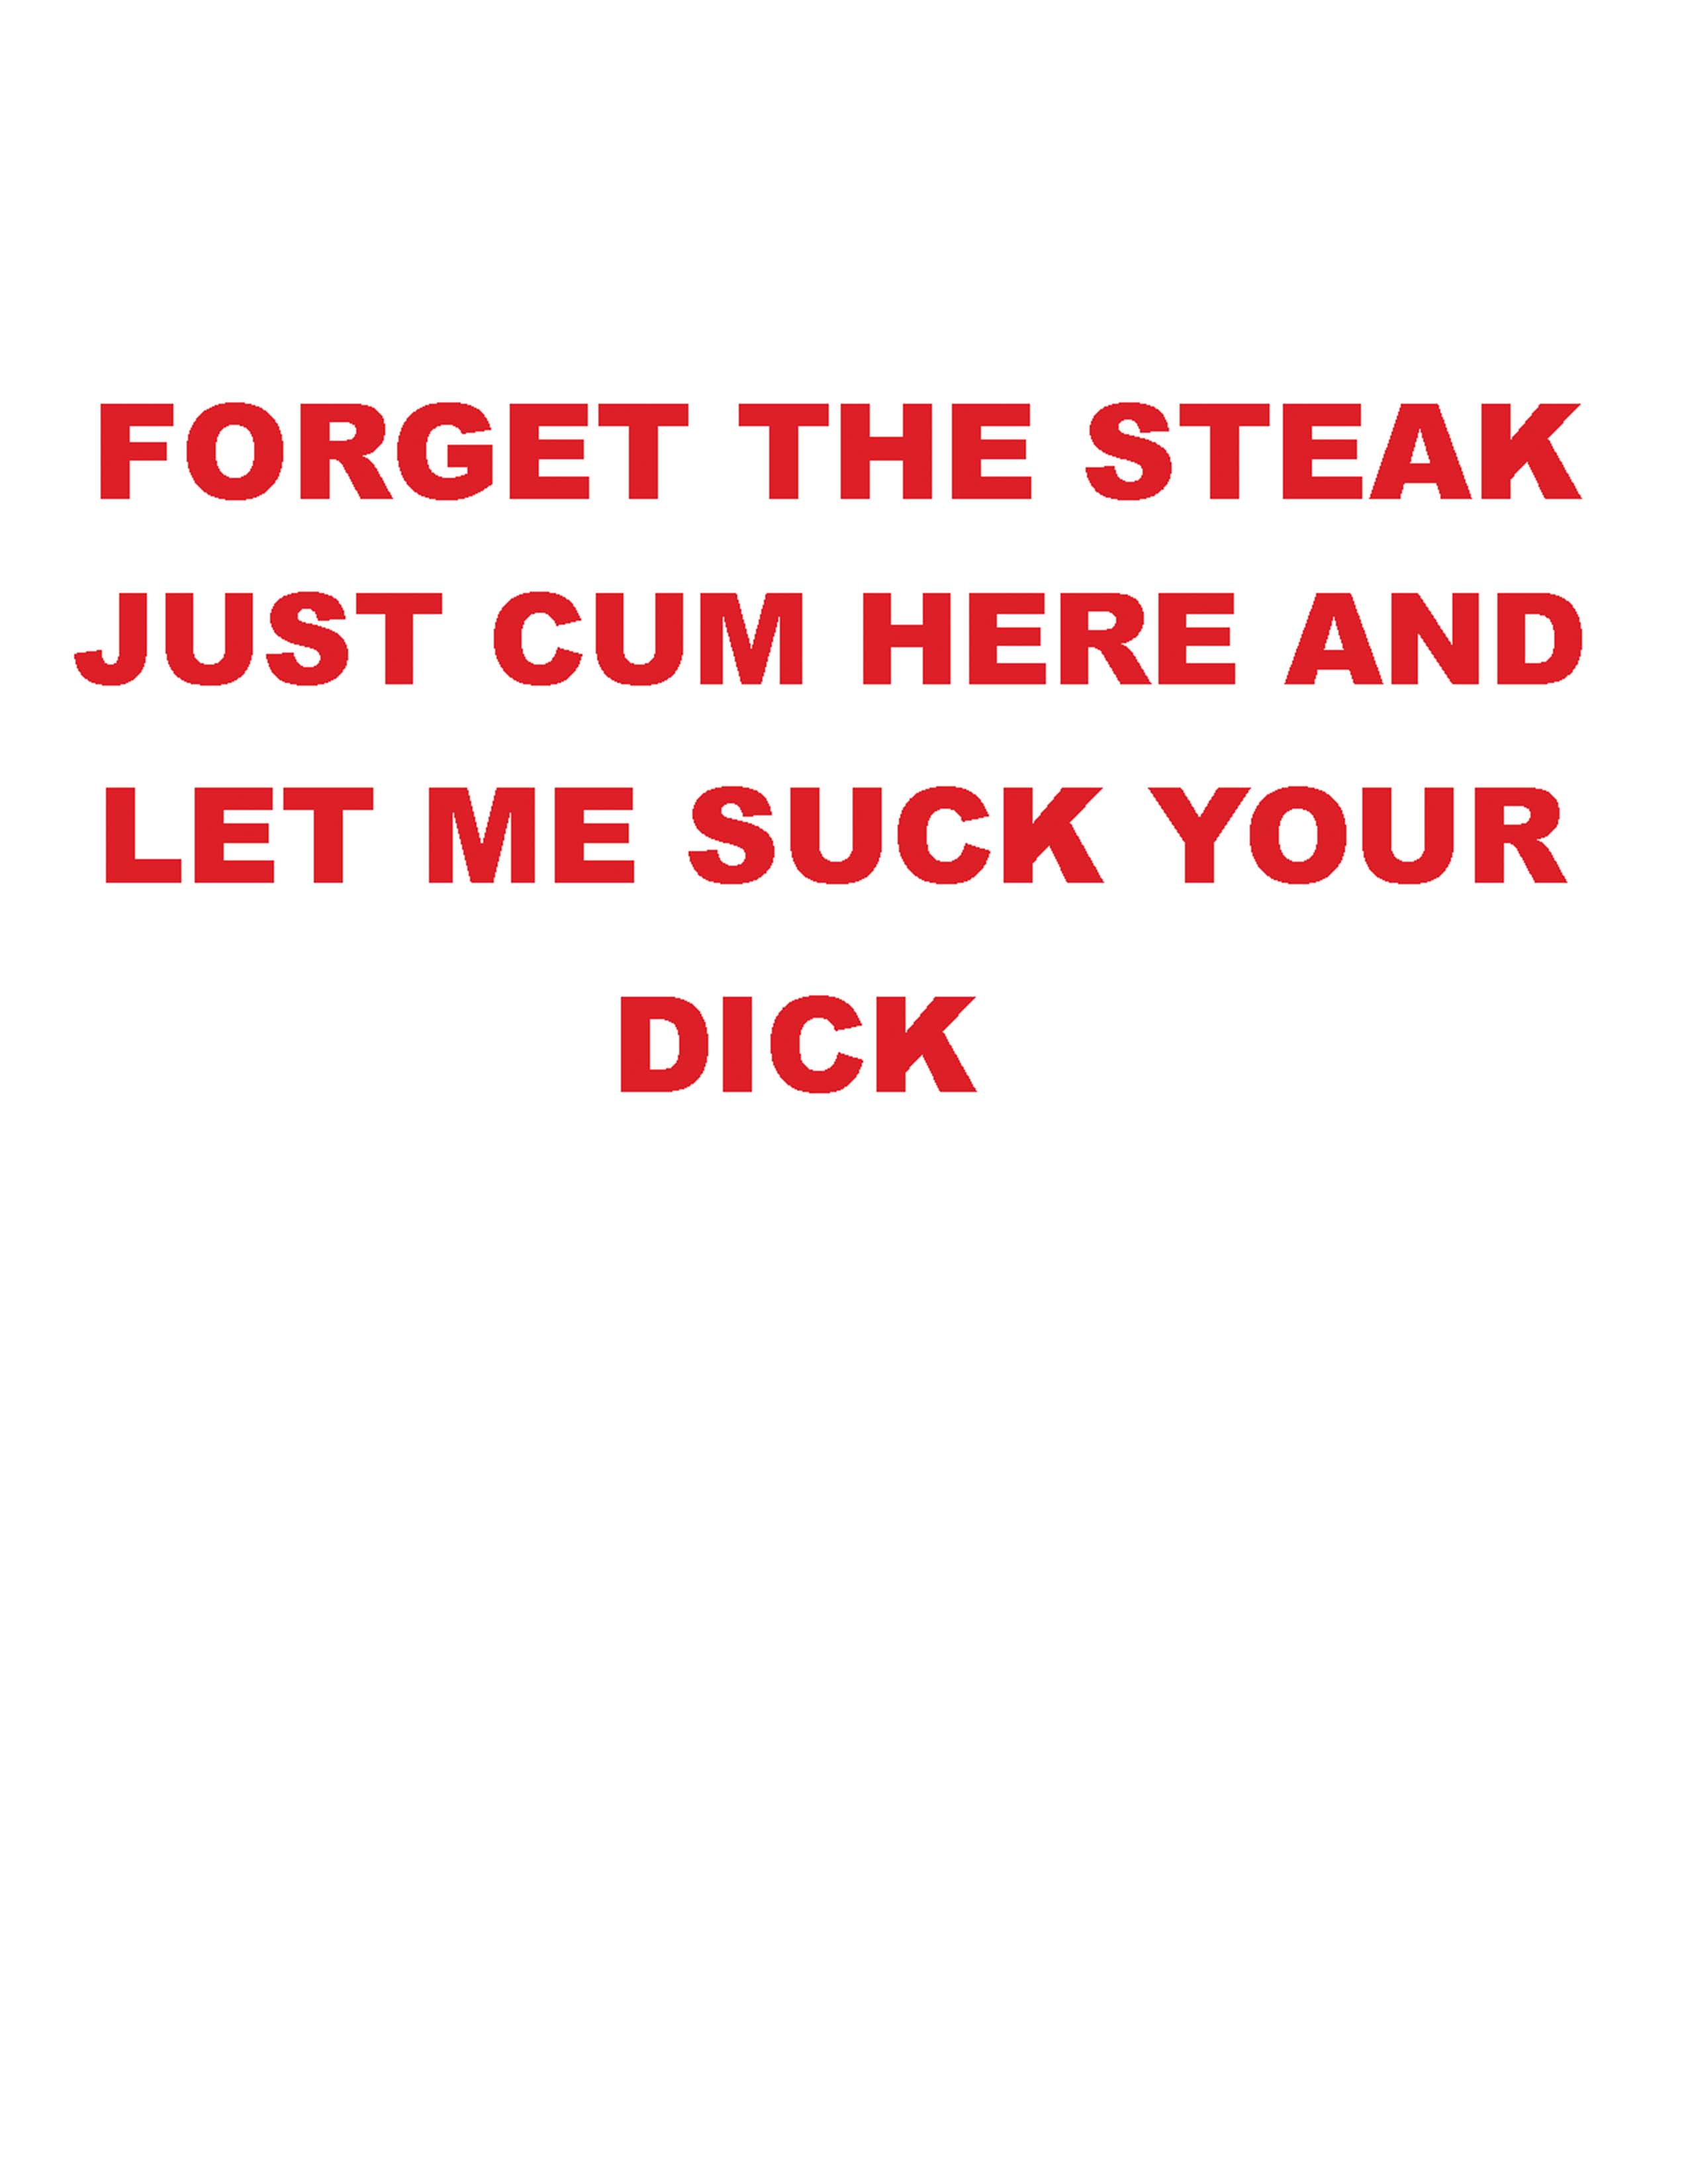 Steak And BJ Day Card (March 14)